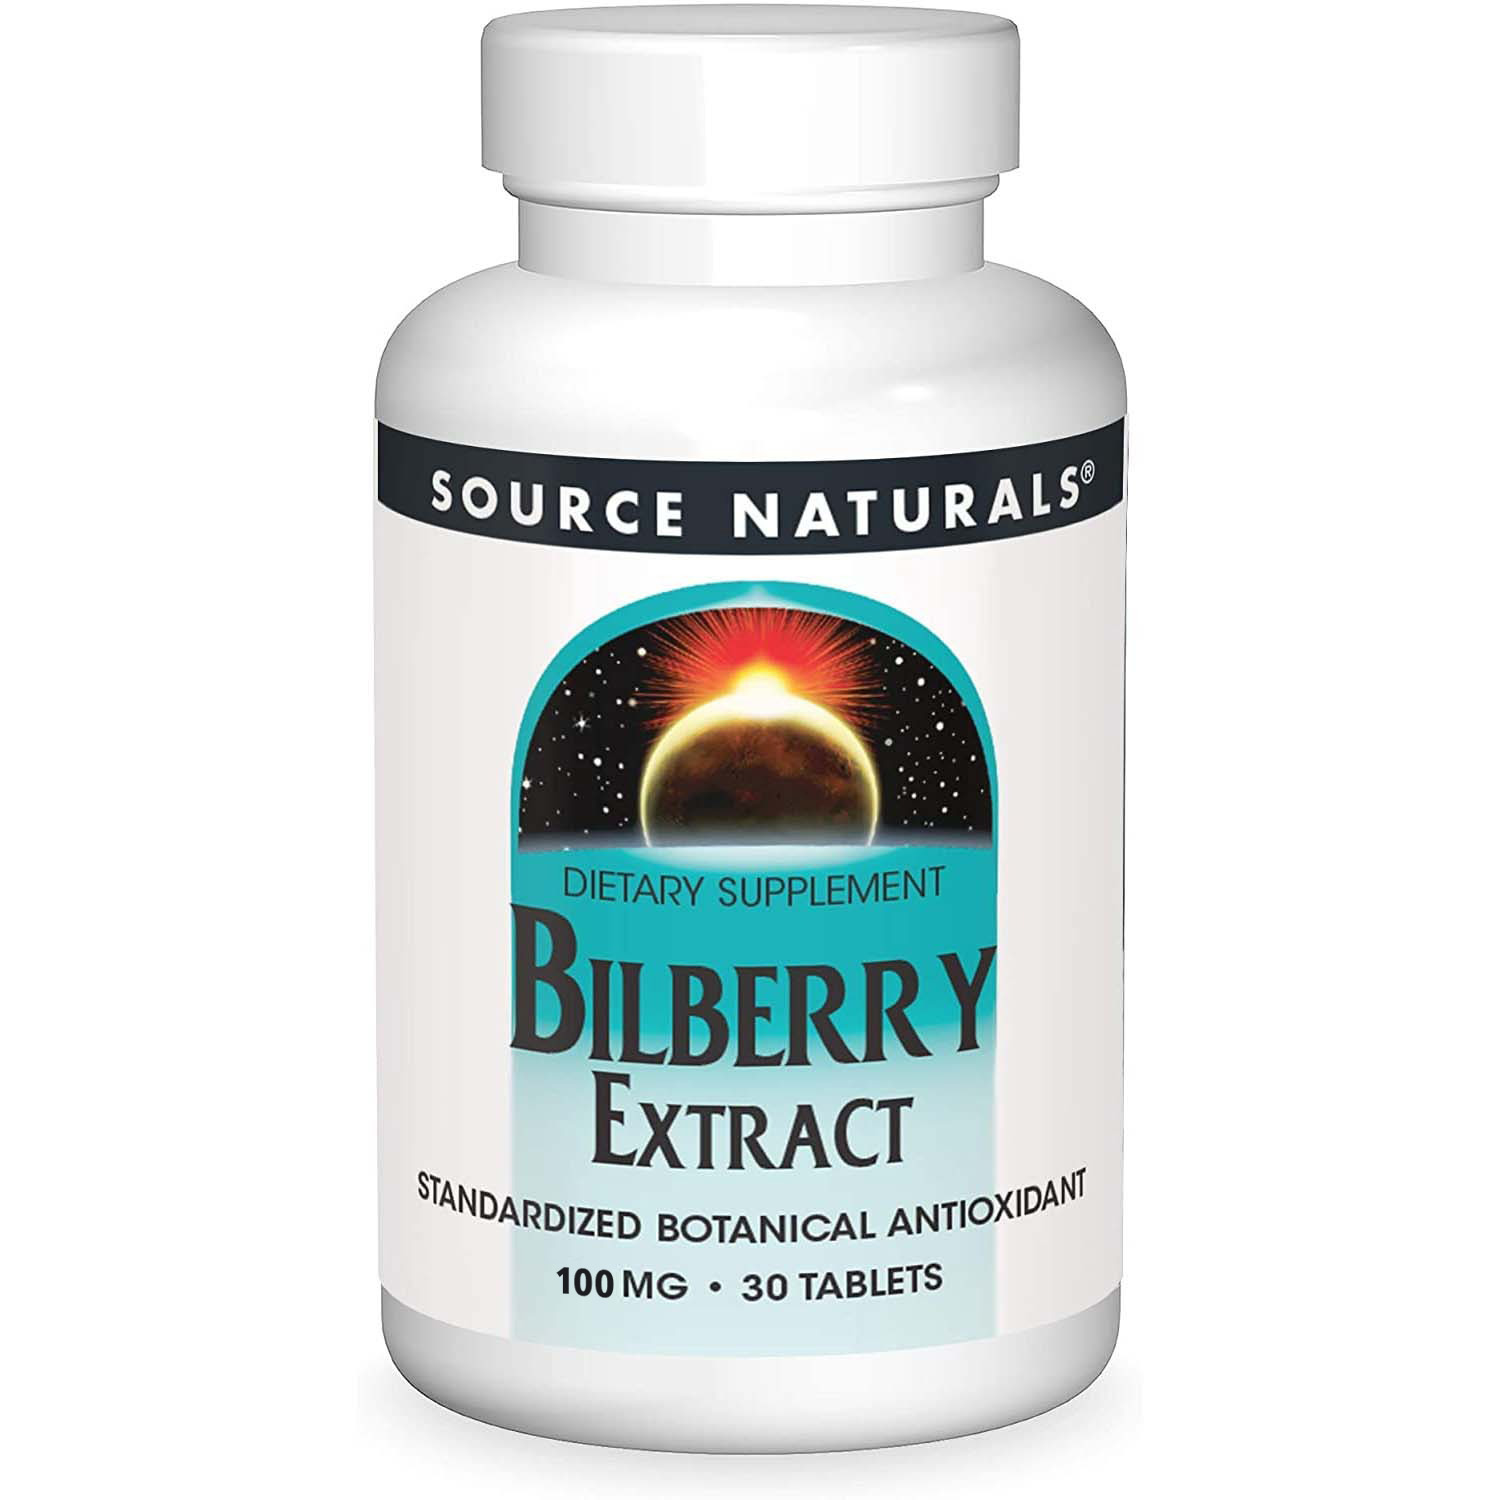 Source Naturals Bilberry Extract, 100 mg, 30 Tablets